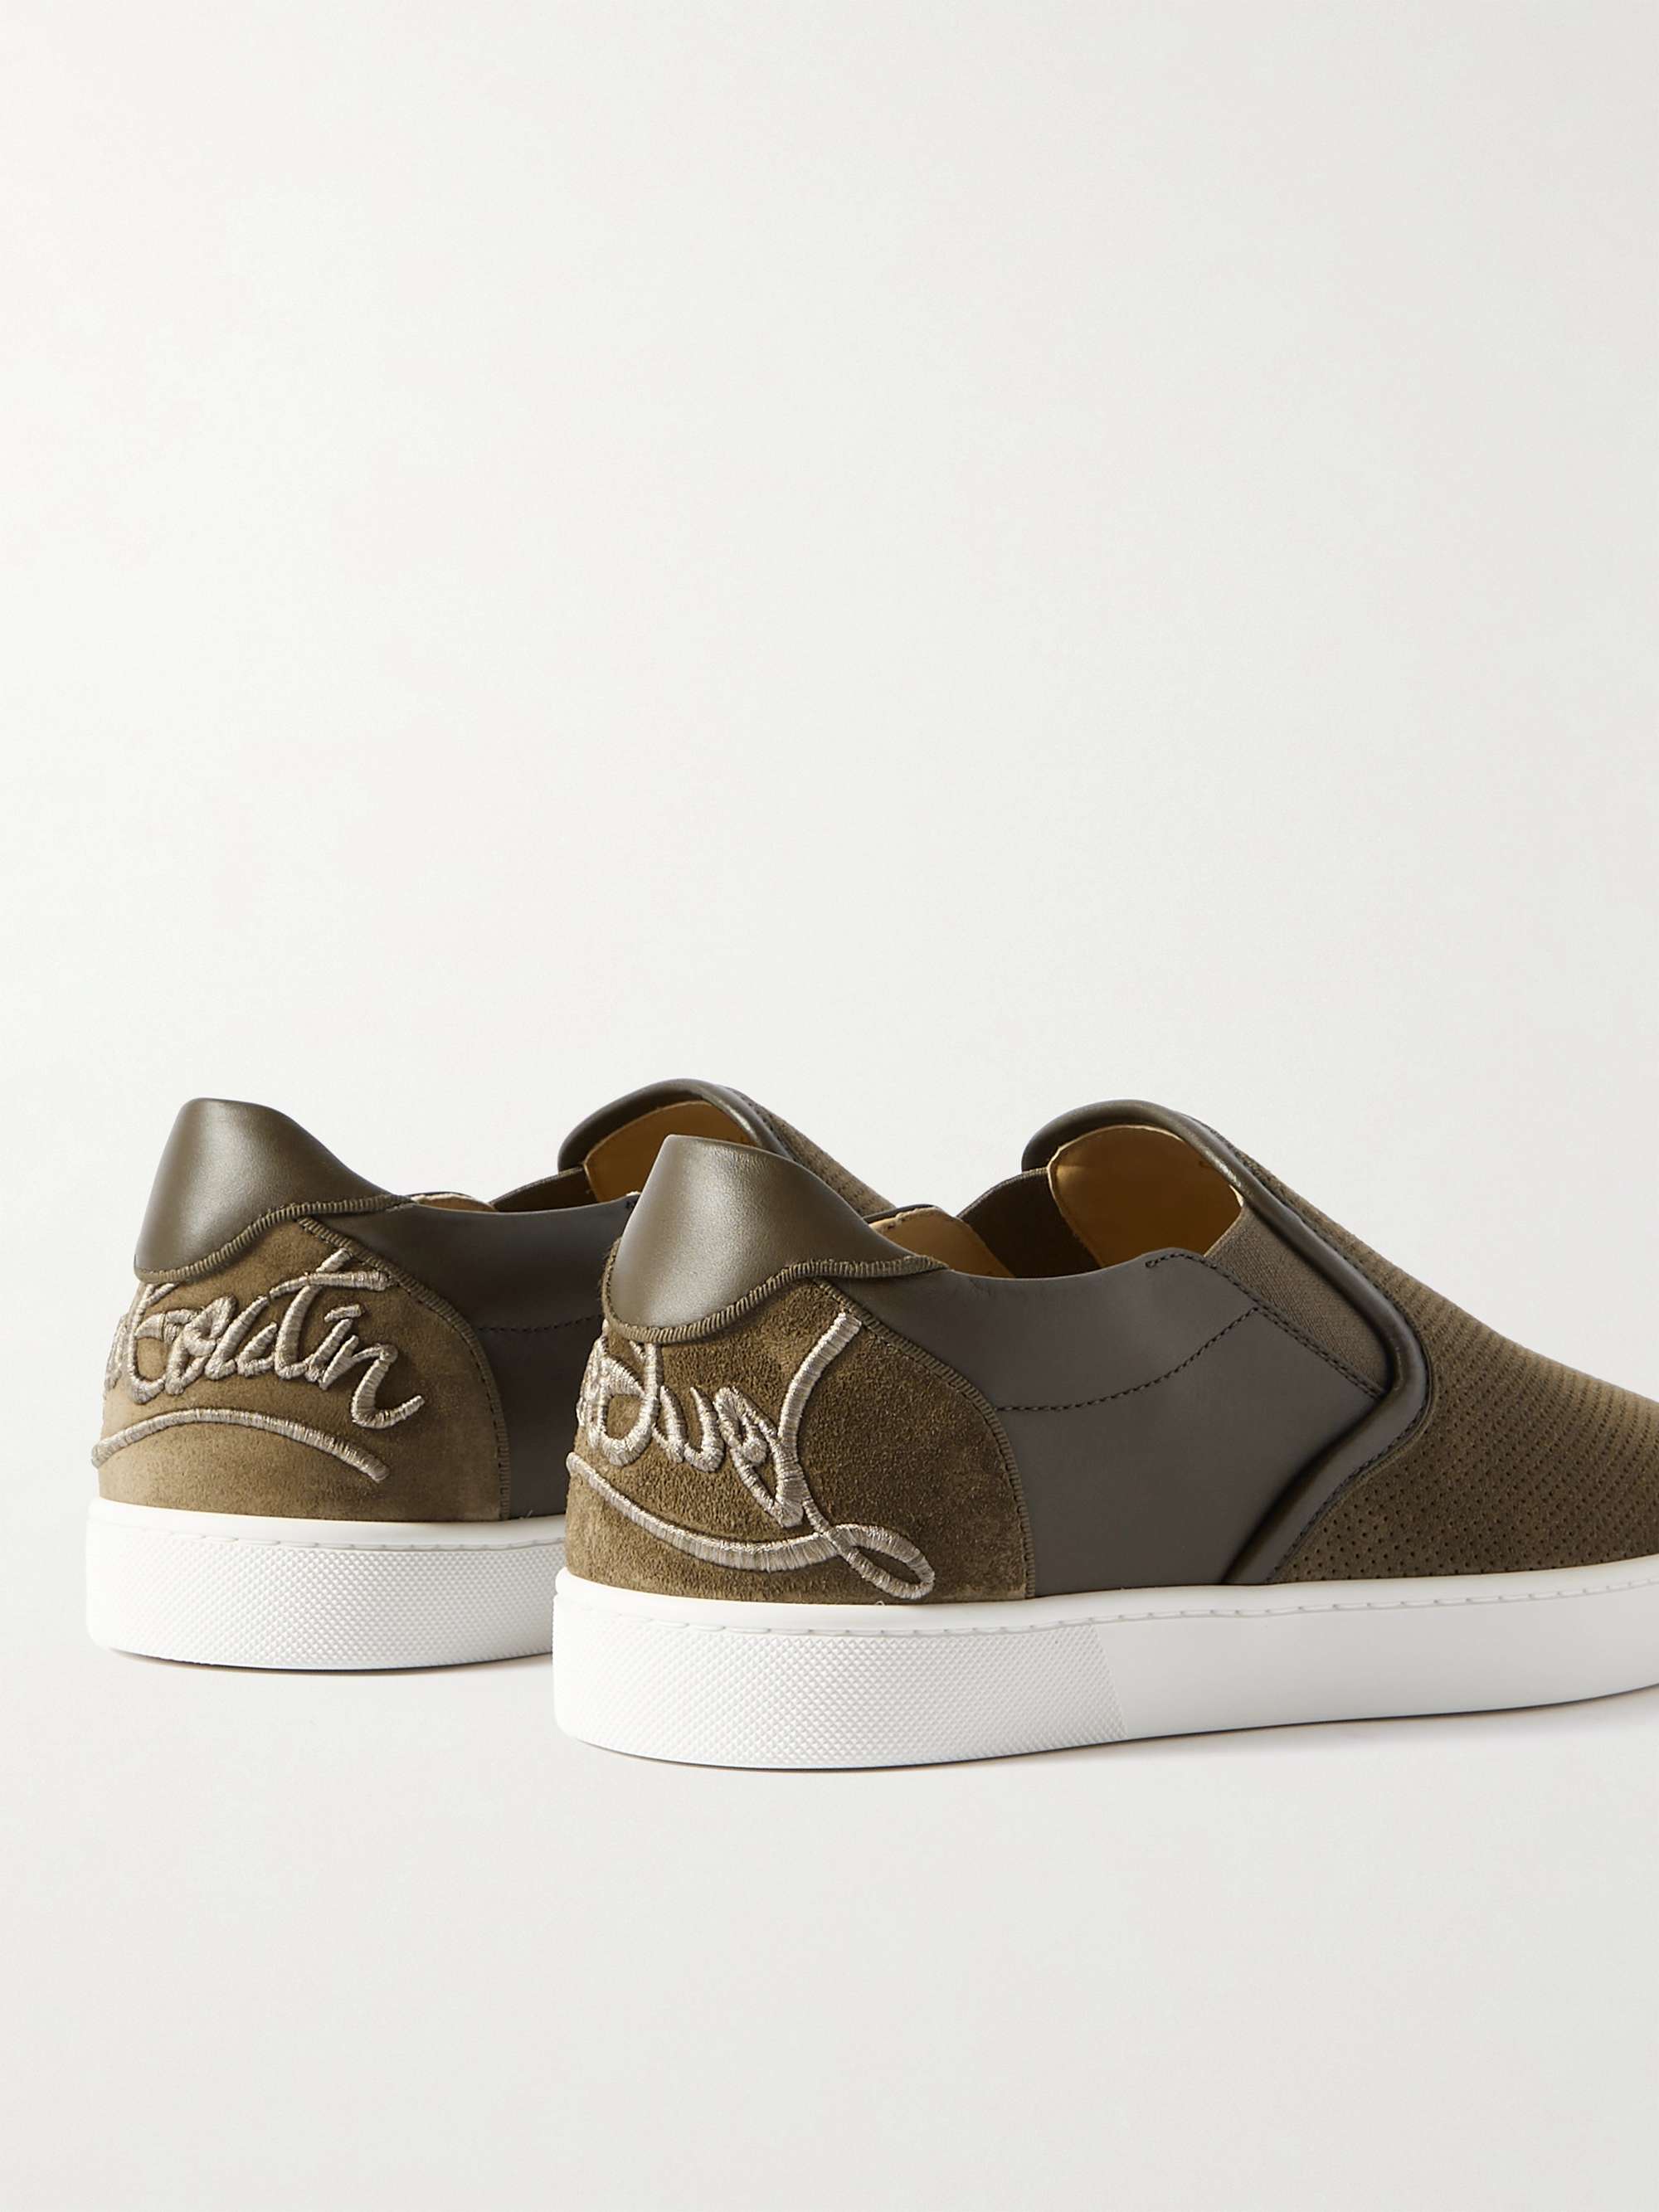 CHRISTIAN LOUBOUTIN Fun Sailor Leather-Trimmed Perforated Suede Slip-On Sneakers